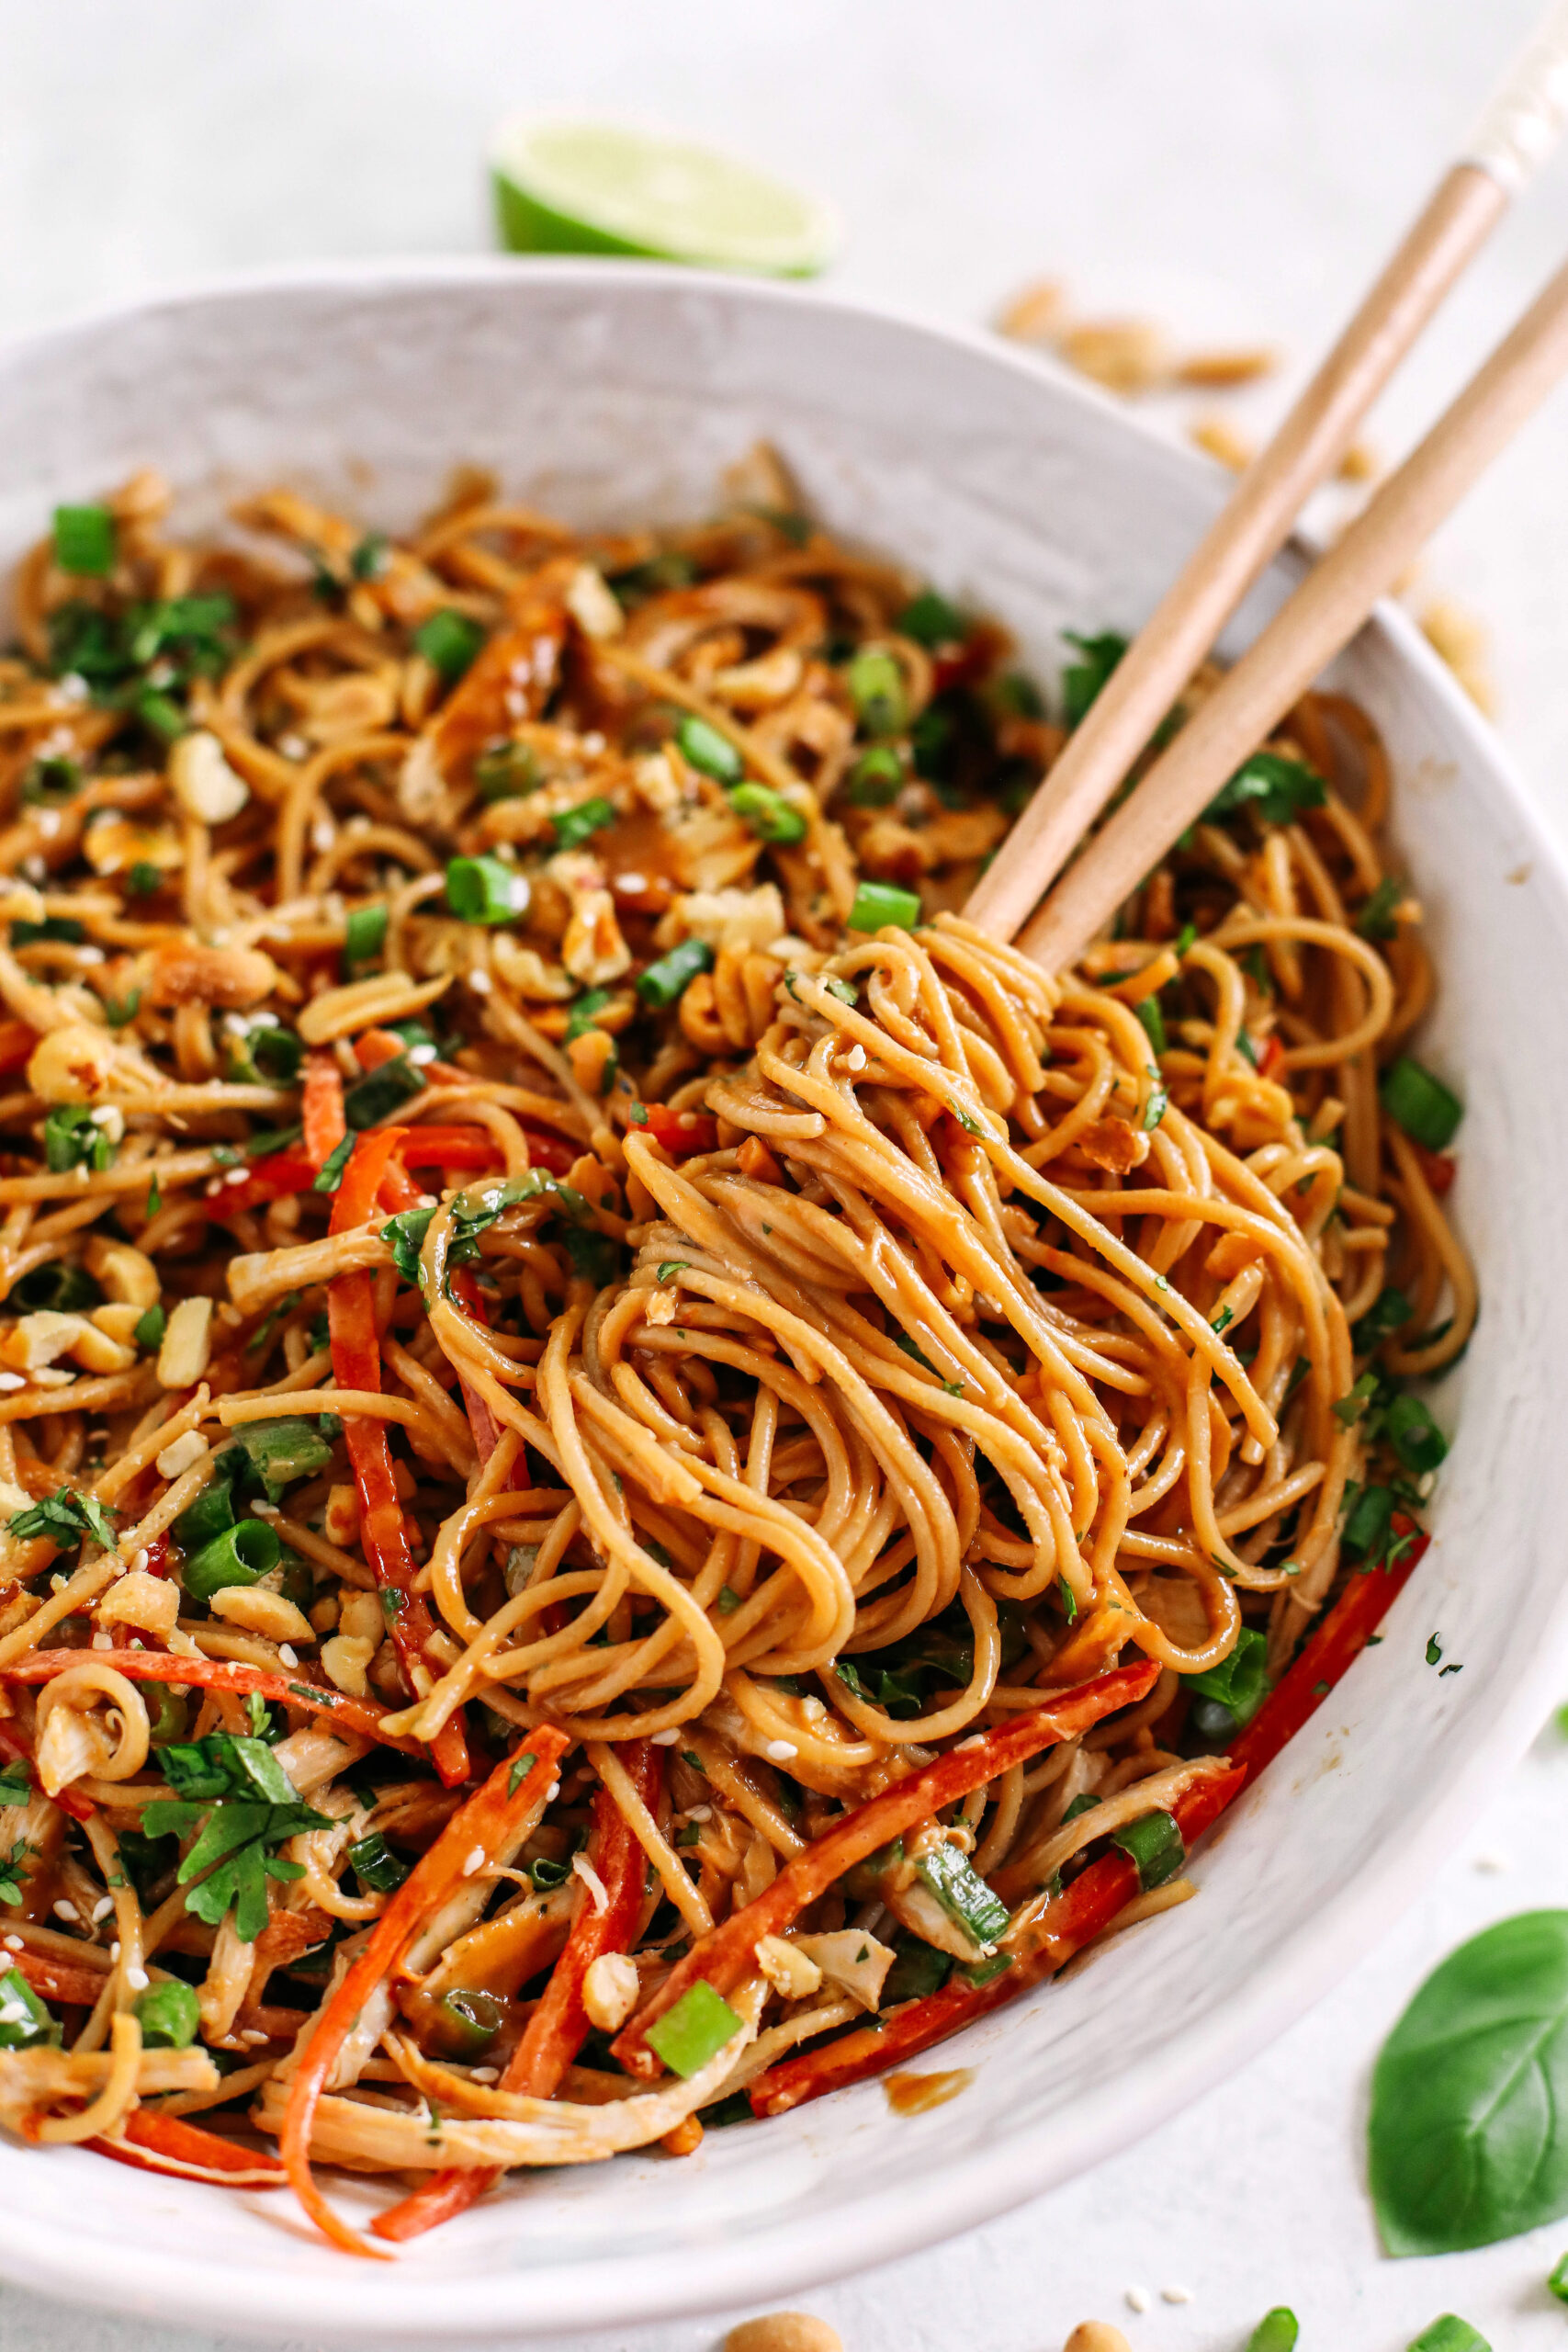 These Asian Peanut Noodles are loaded with shredded chicken, bell pepper, green onions, crunchy peanuts and fresh herbs all tossed together in a delicious peanut sauce!